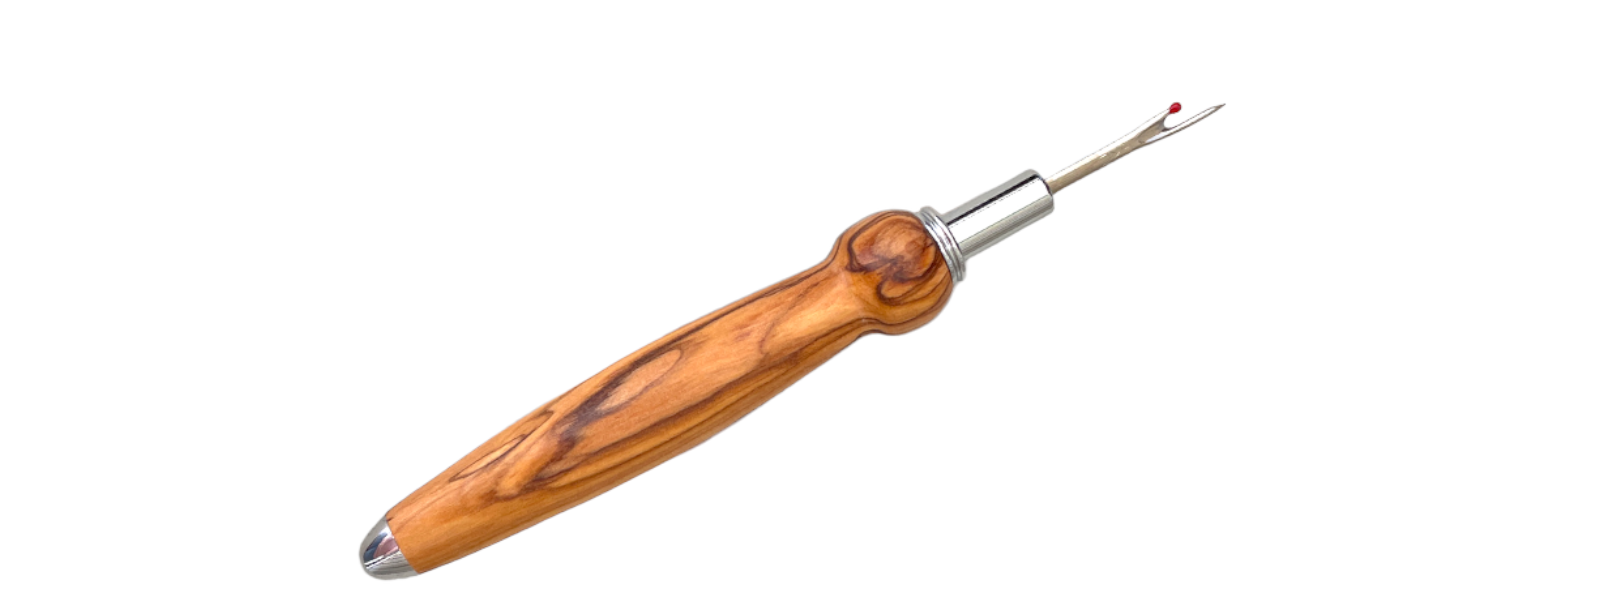 What Makes a Hand Turned Seam Ripper Different from Store Bought?